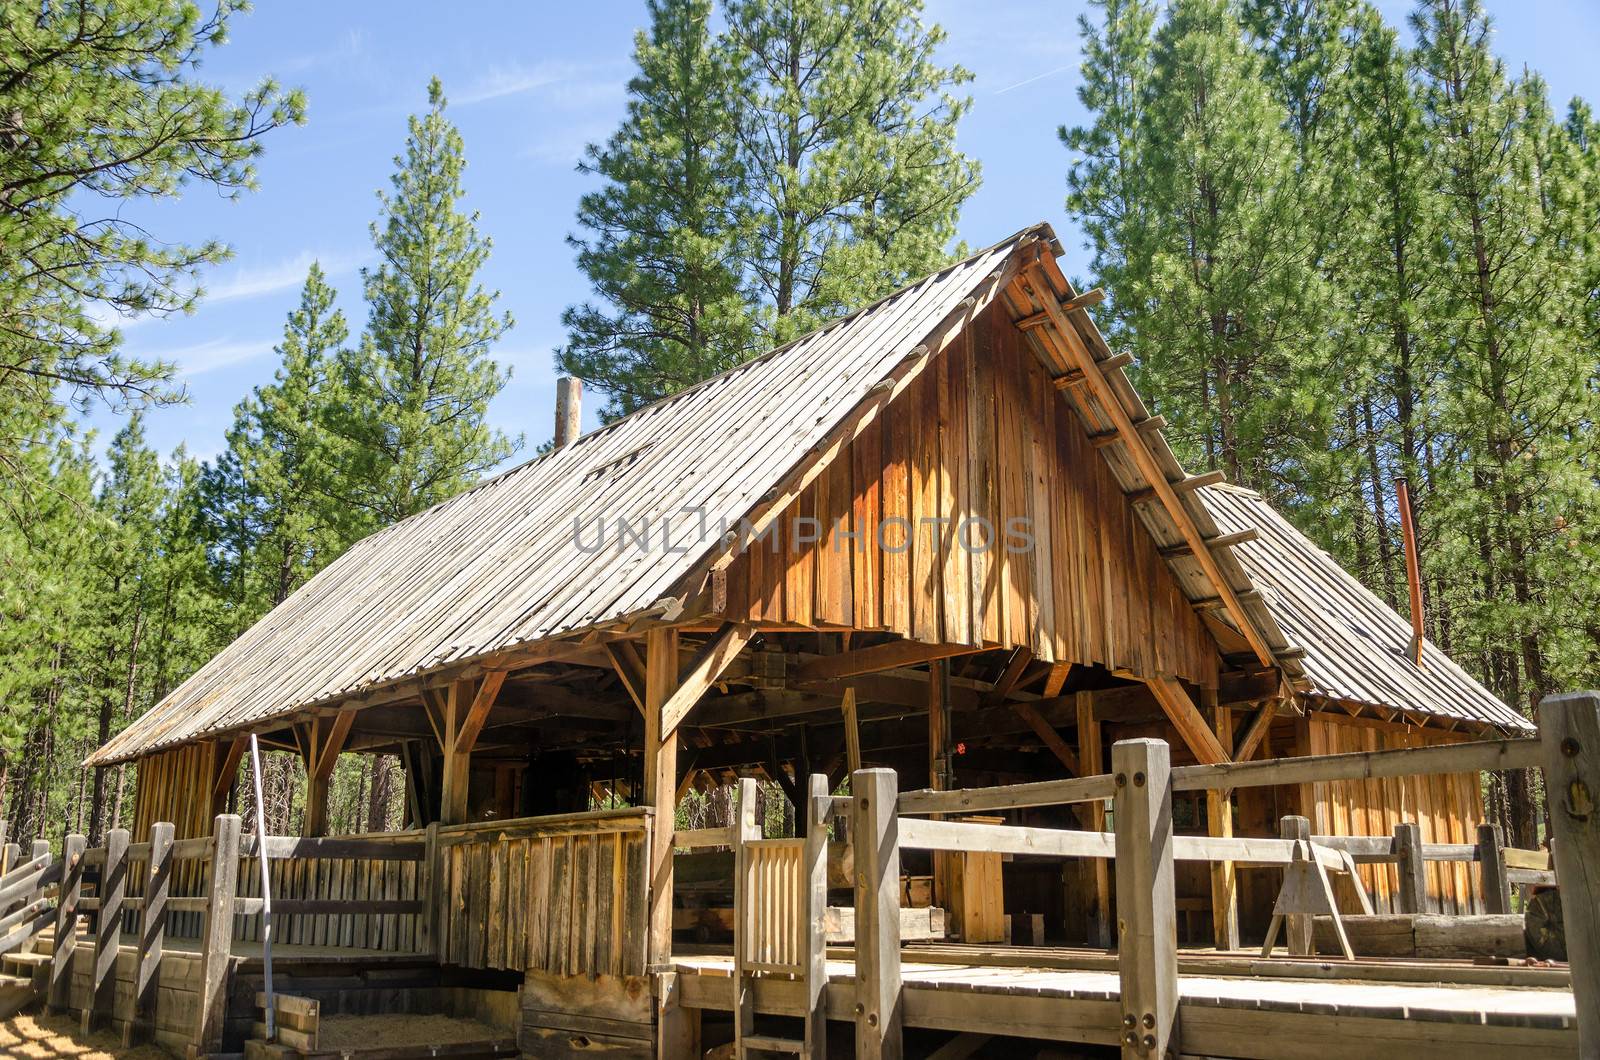 Old wooden lumber mill in Bend, Oregon